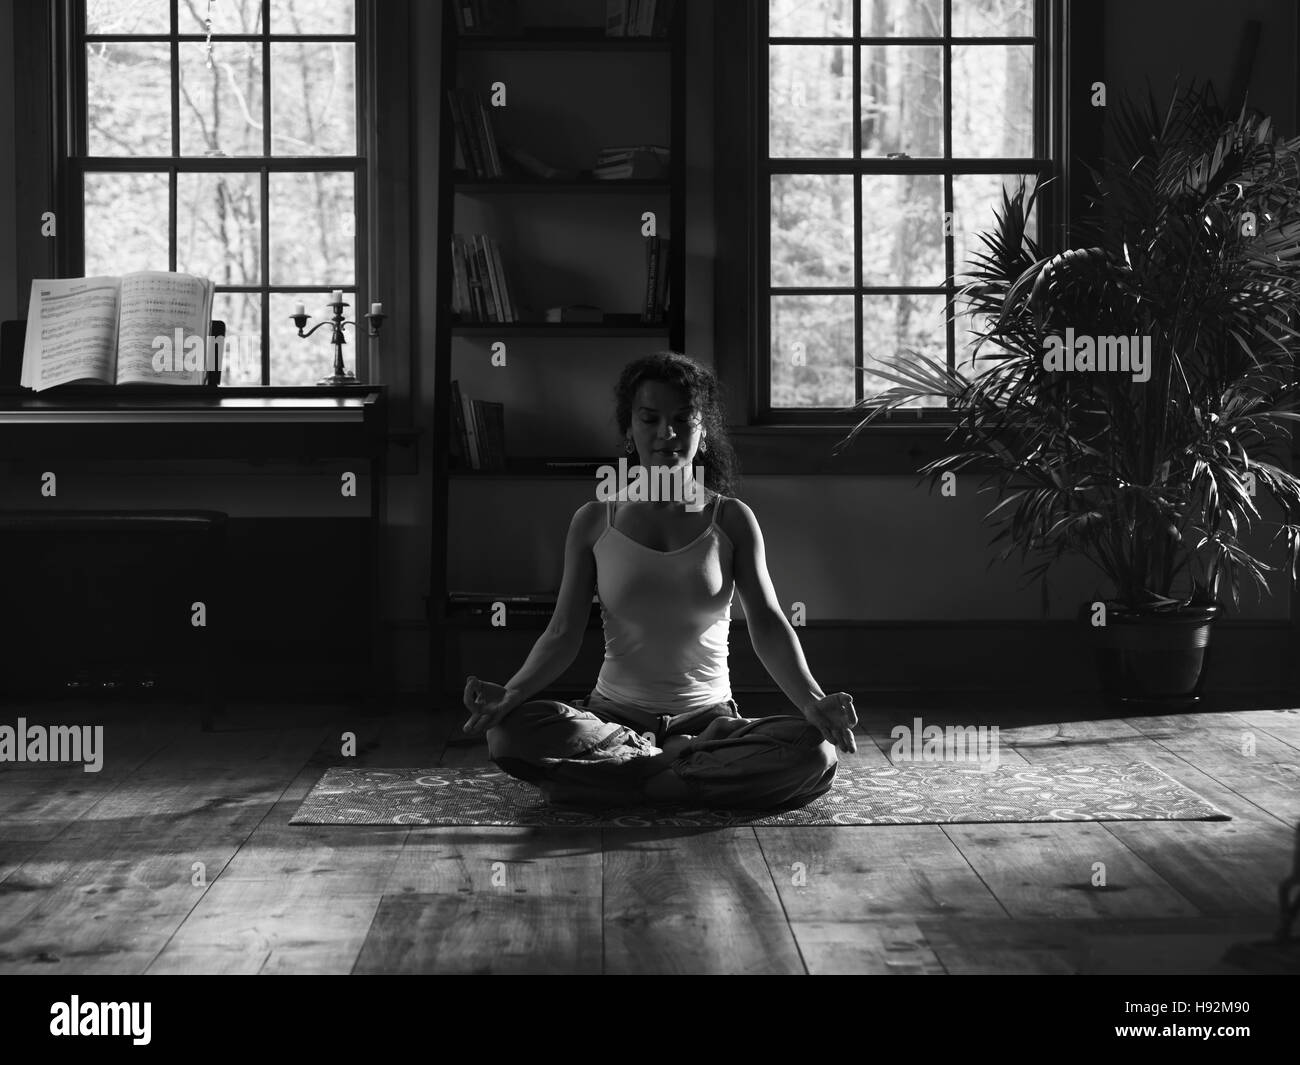 Woman meditating at home on a yoga mat artistic black and white portrait Stock Photo